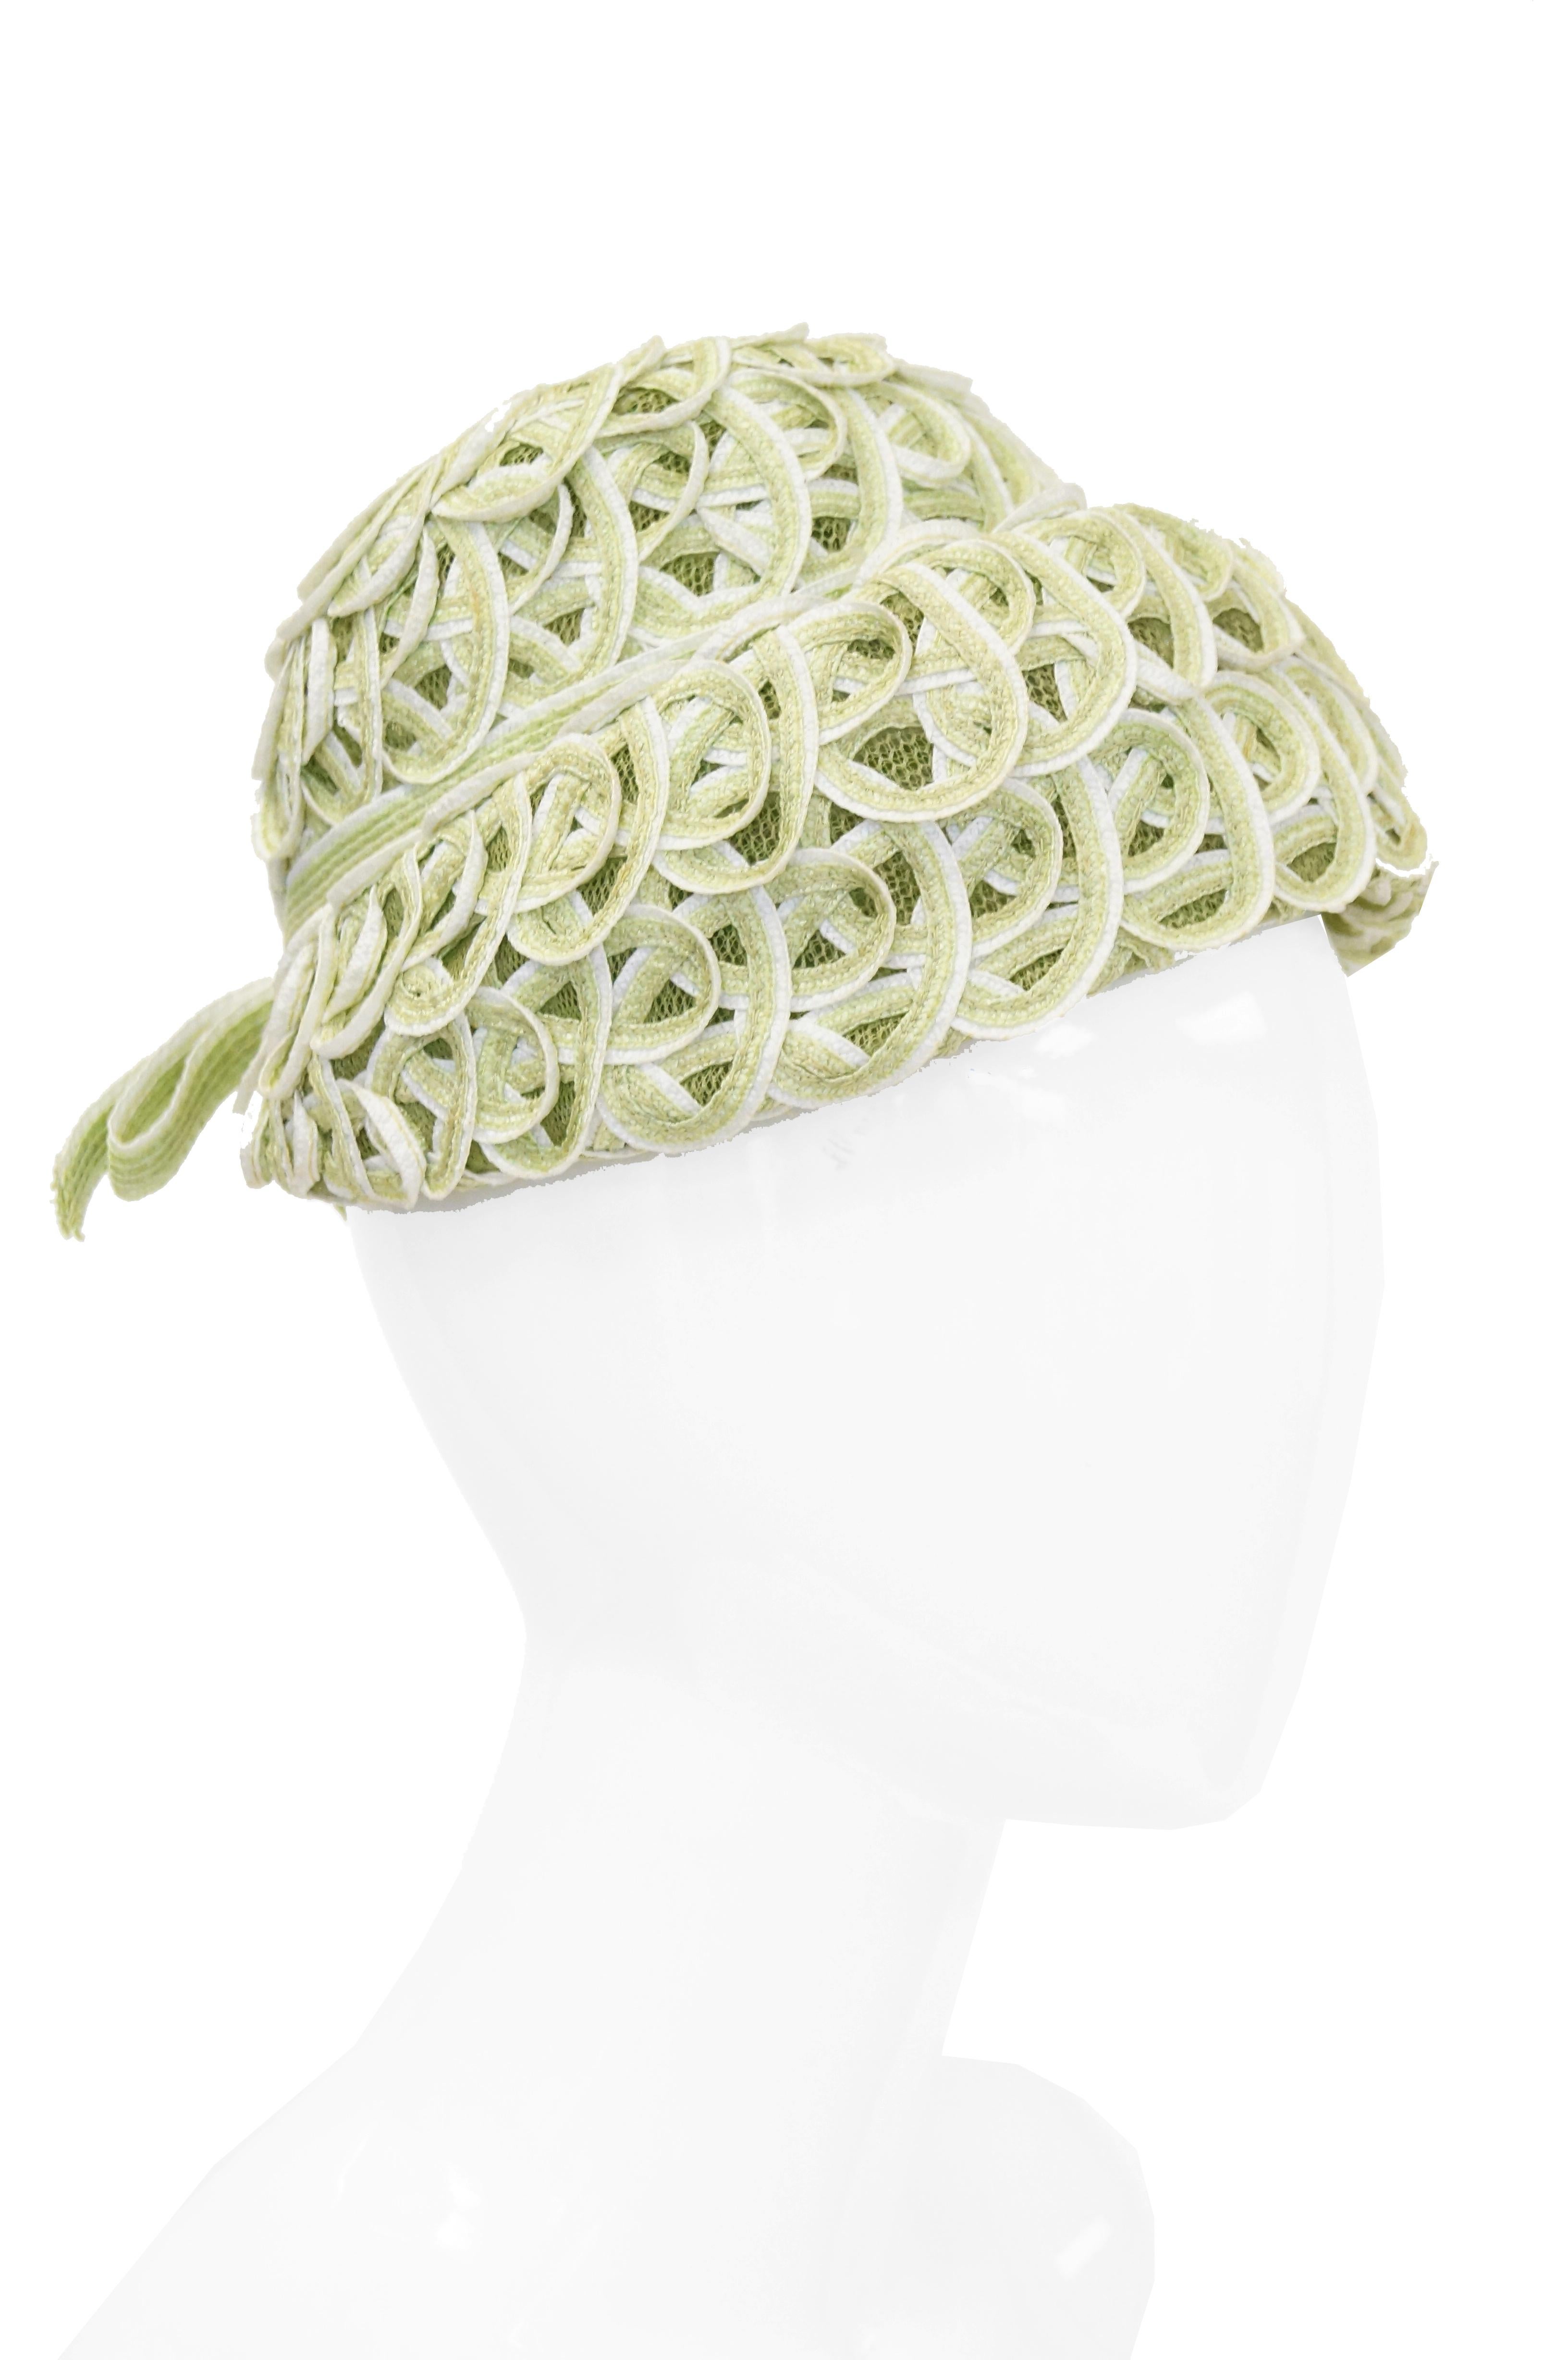 Balenciaga Reproduction Peach Basket Hat in a Subtle Green, 1950s  For Sale 1